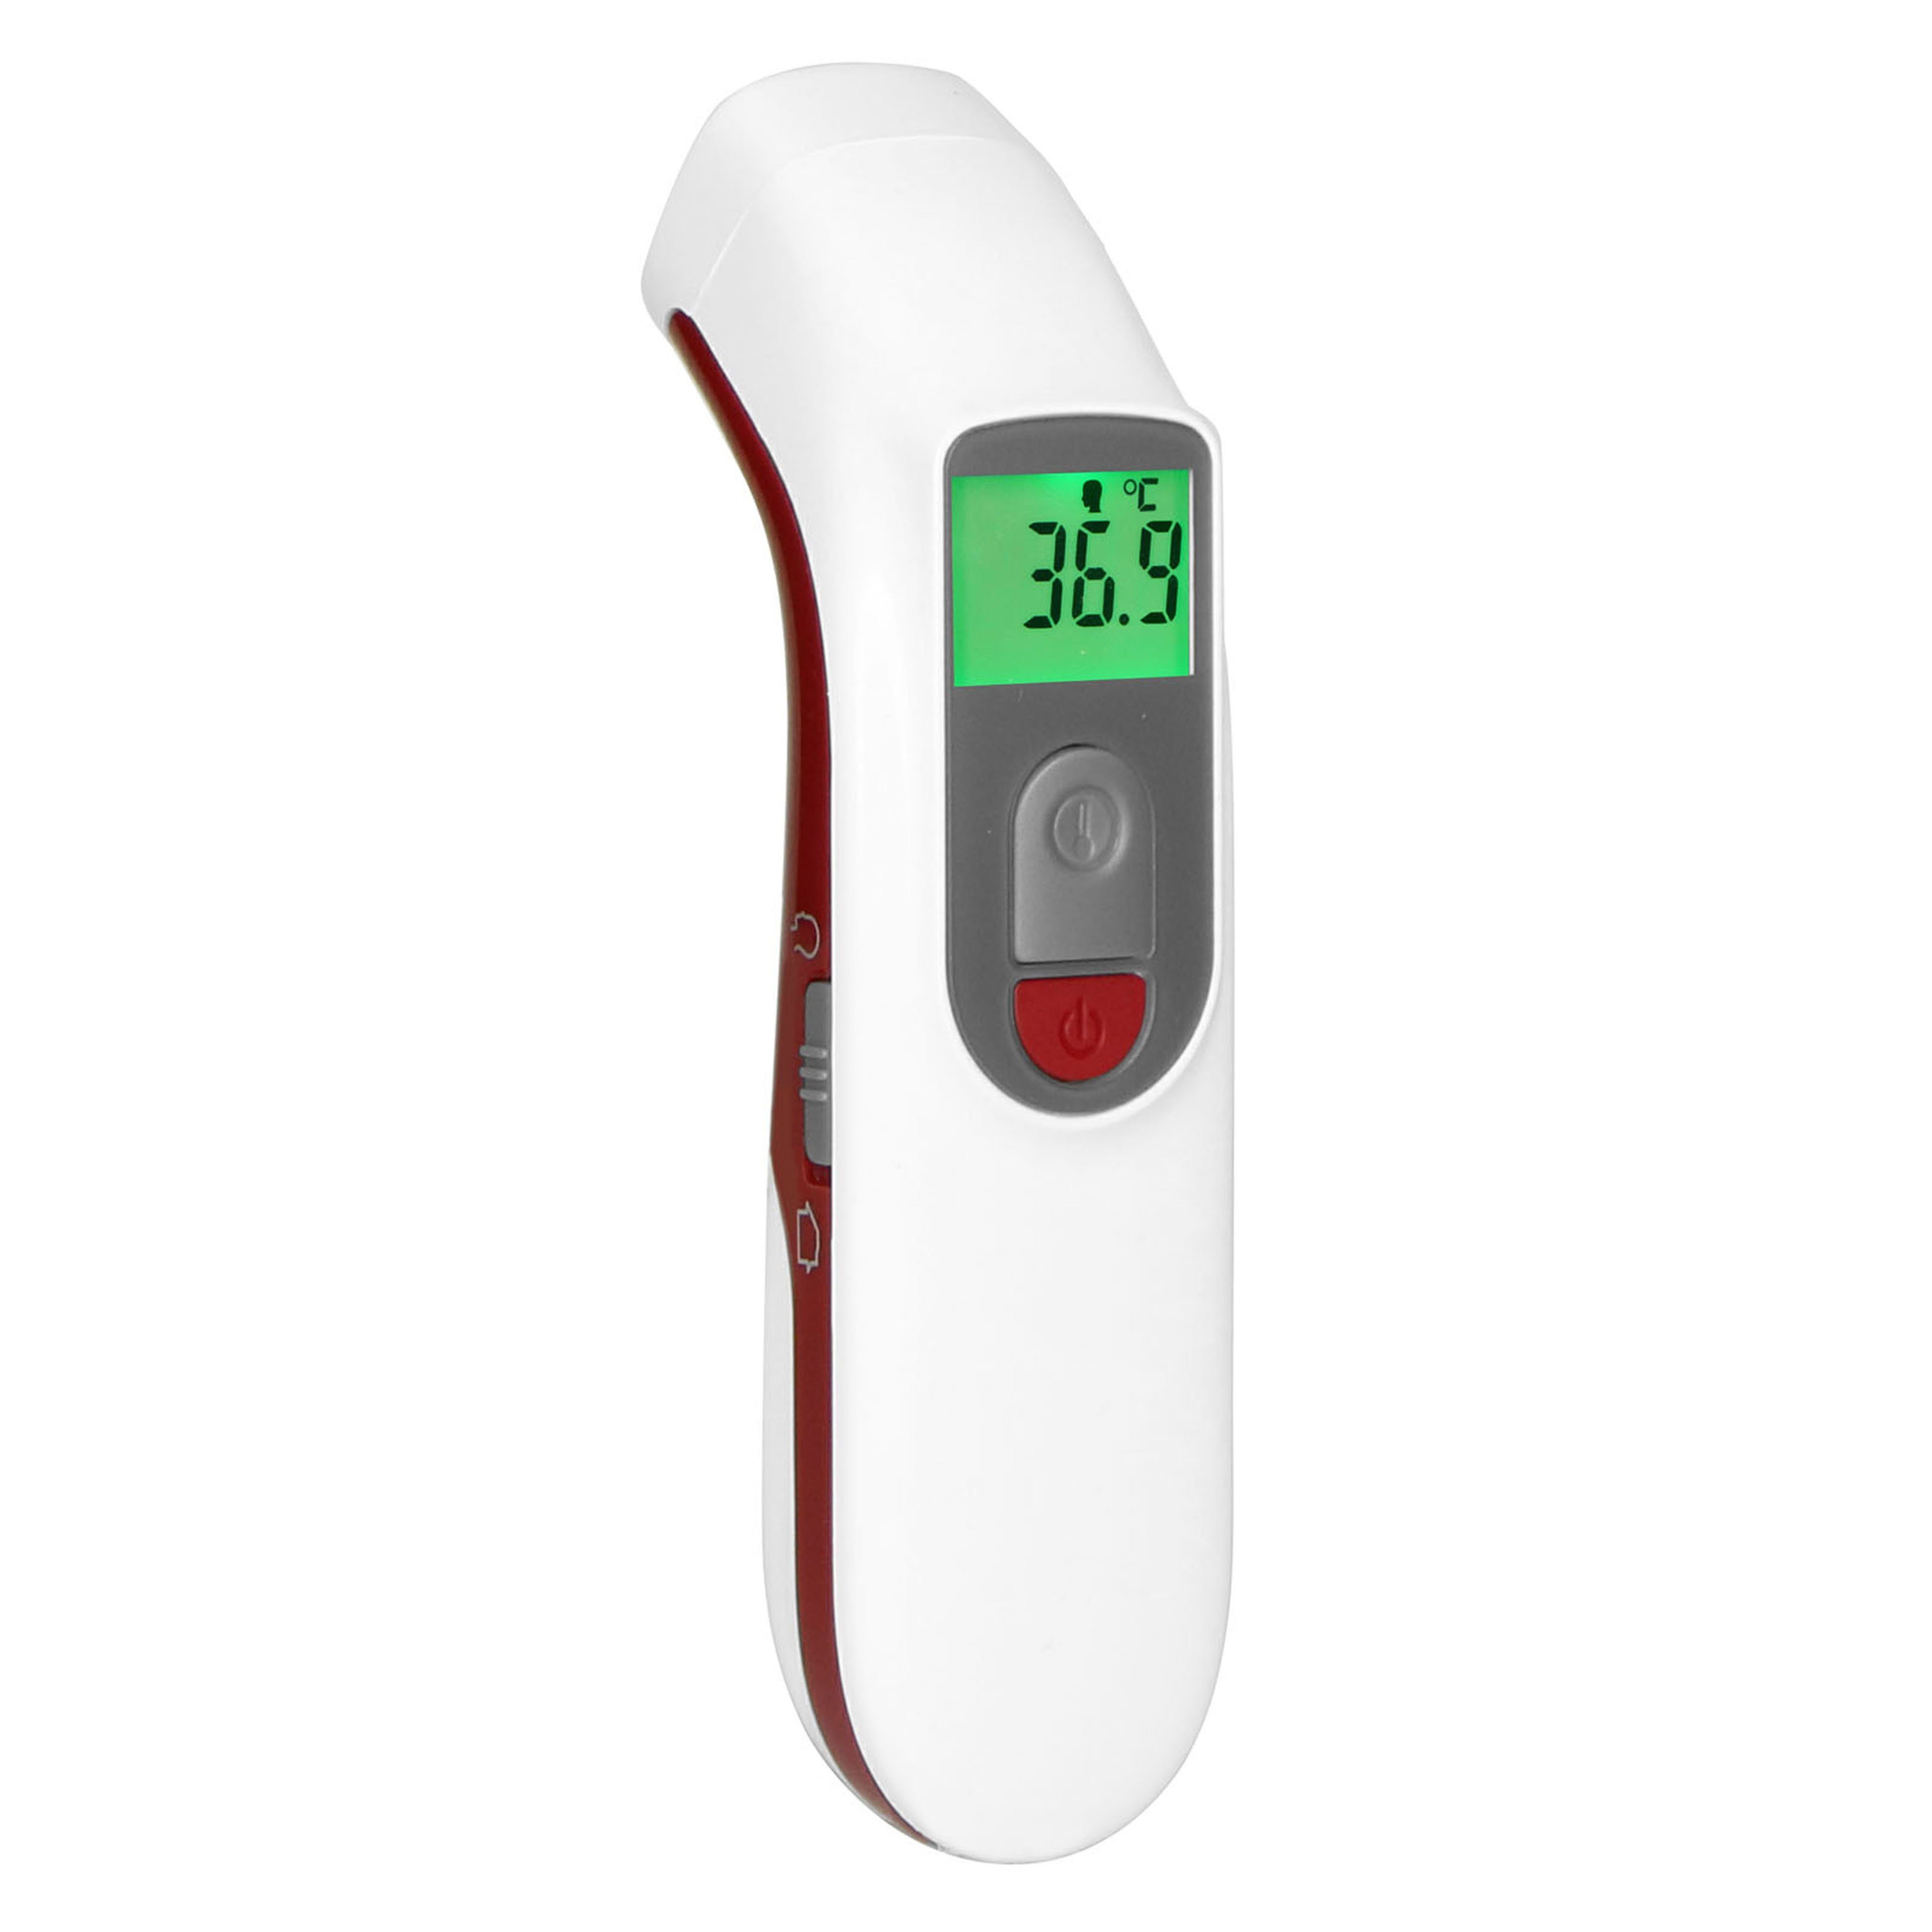 Alecto Home Alecto Fieberthermometer BC38, 1-tlg., Infrarot-Stirnthermometer